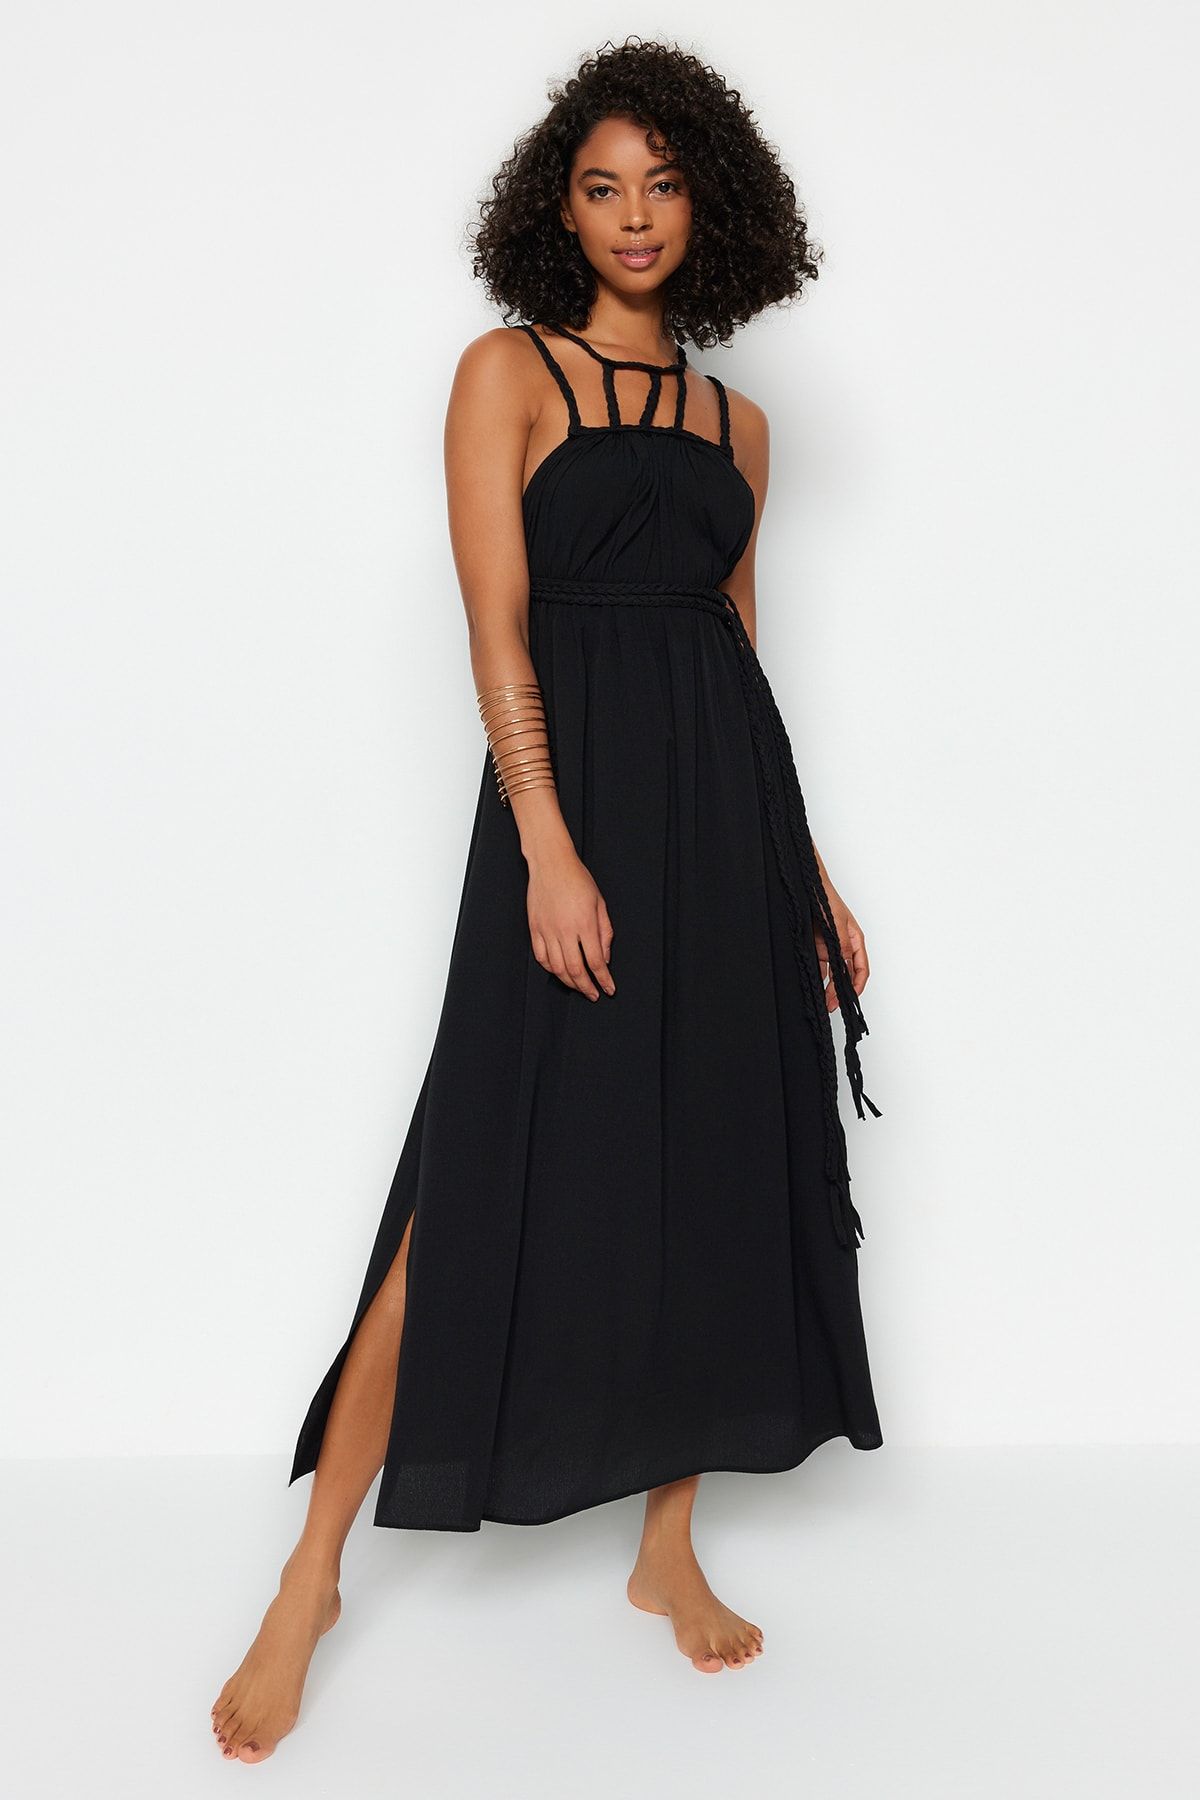 Cut Out Hello Molly Dresses  Shop Dresses Online - Hello Molly US